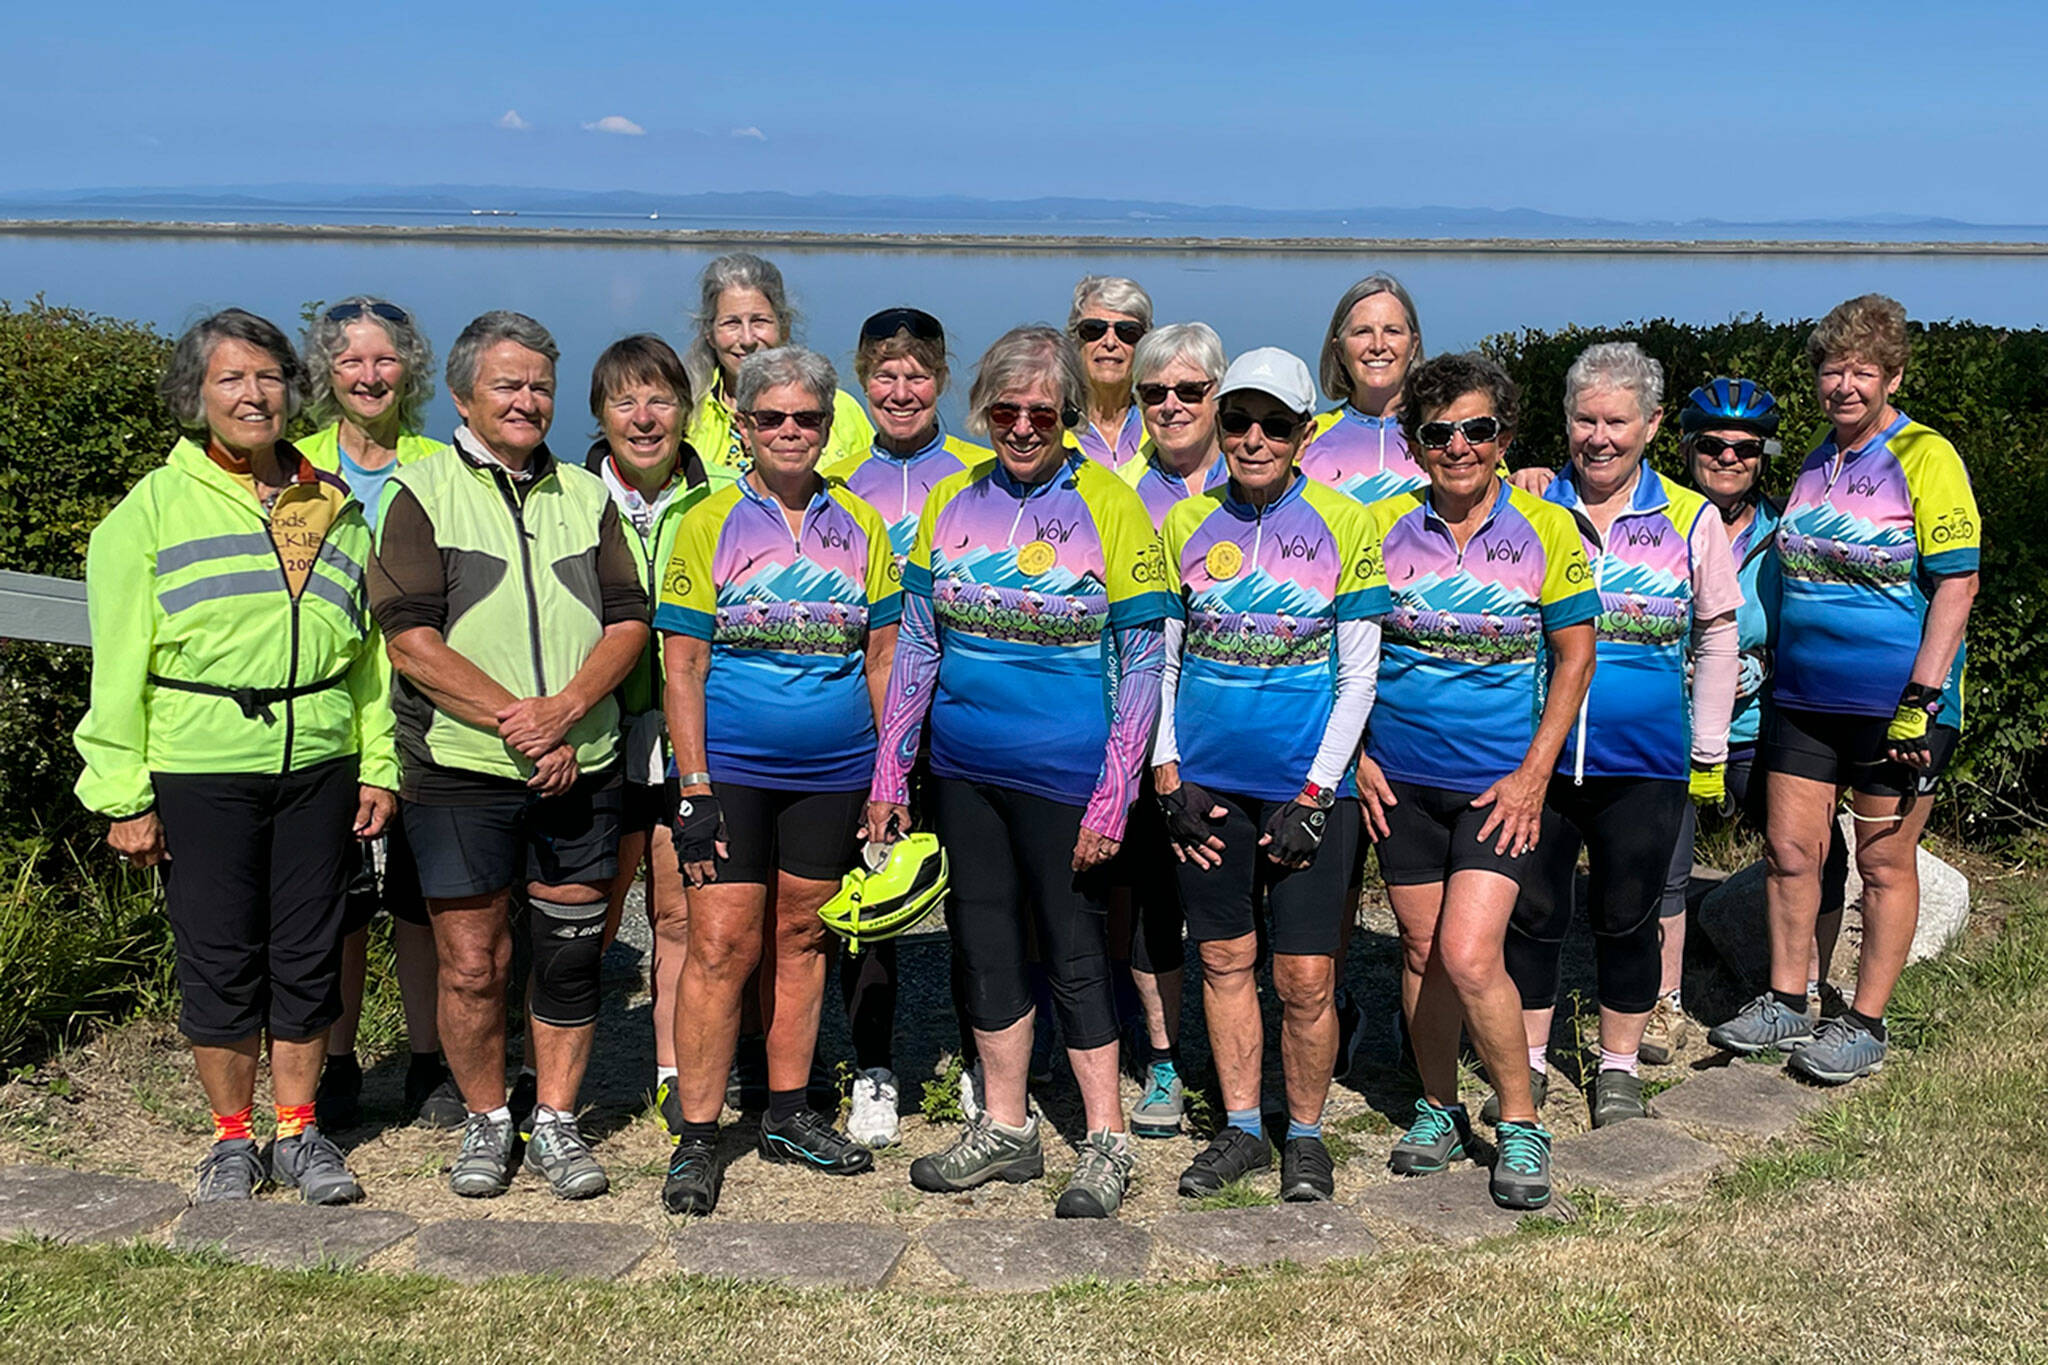 Sequim Gazette photo by Matthew Nash/ Some of the riders with Women on Wheels (WOW) gather during an annual meeting on Sept. 1 in Dungeness. The group rides 9:30 a.m. Tuesday and Friday starting at Railroad Bridge Park.